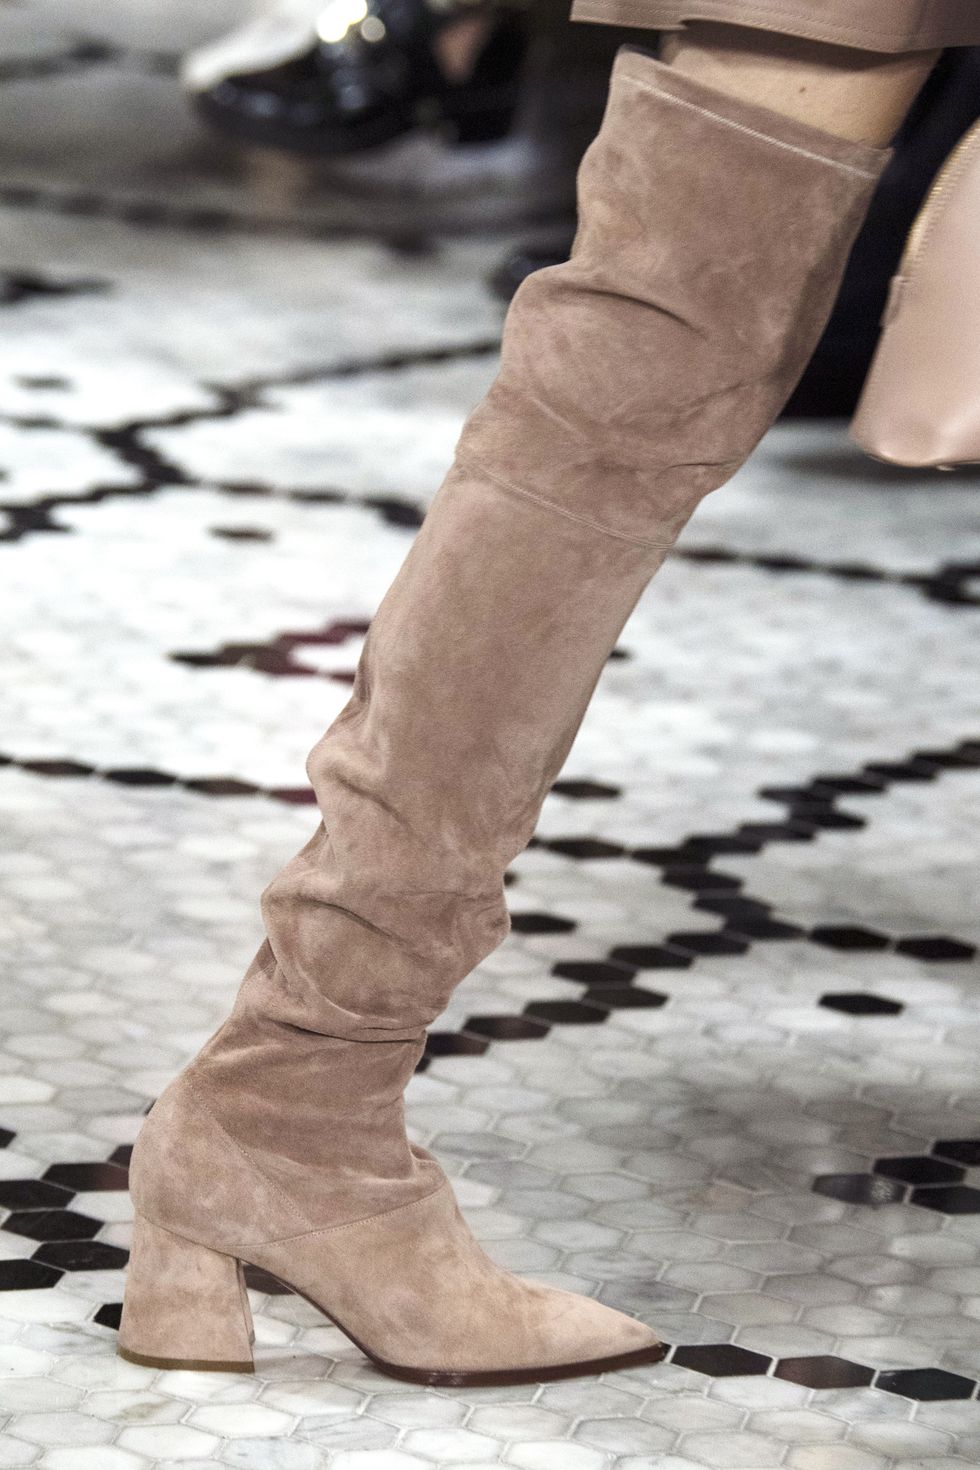 Footwear, Shoe, Leg, Fashion, Boot, Brown, Beige, Knee-high boot, Ankle, Riding boot, 